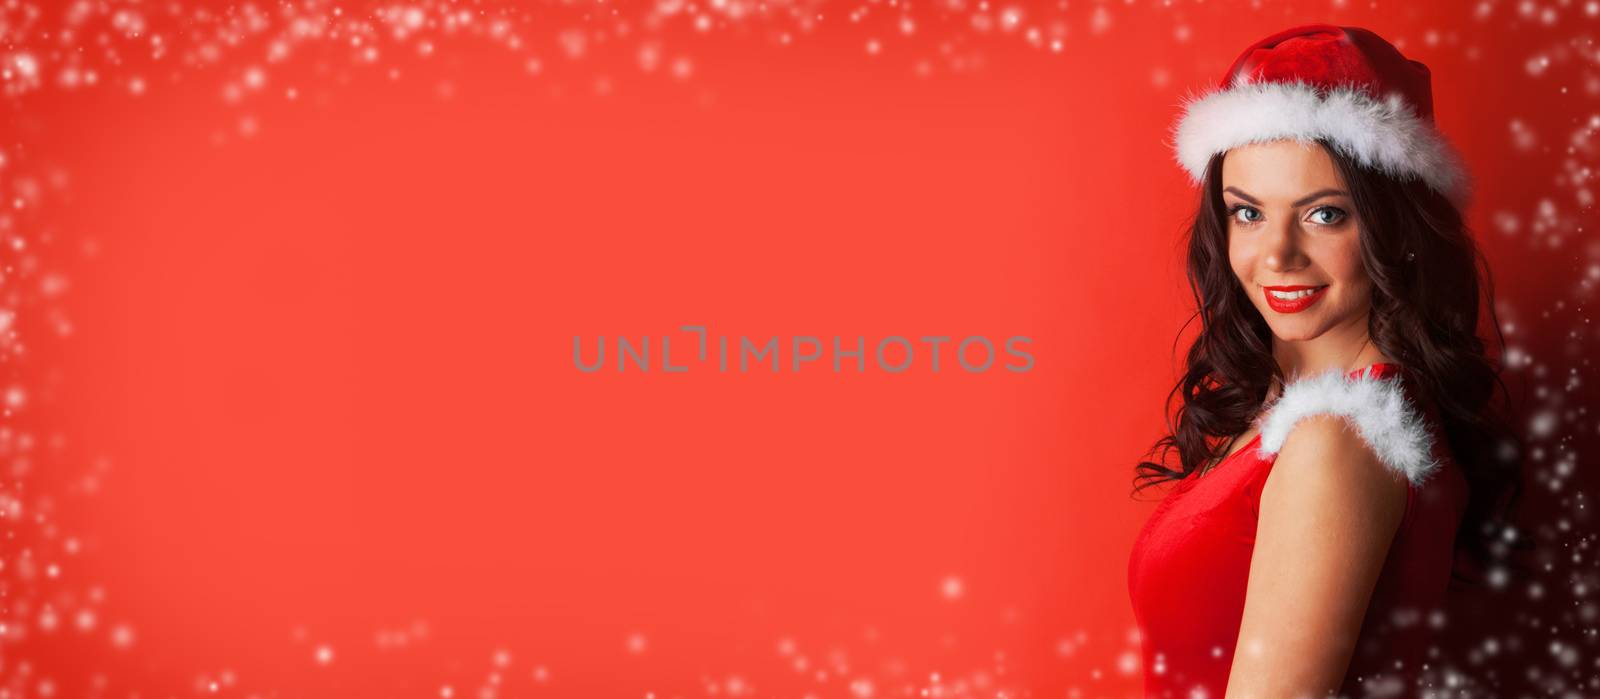 Pretty Pin-up style Santa girl in red hat on red background